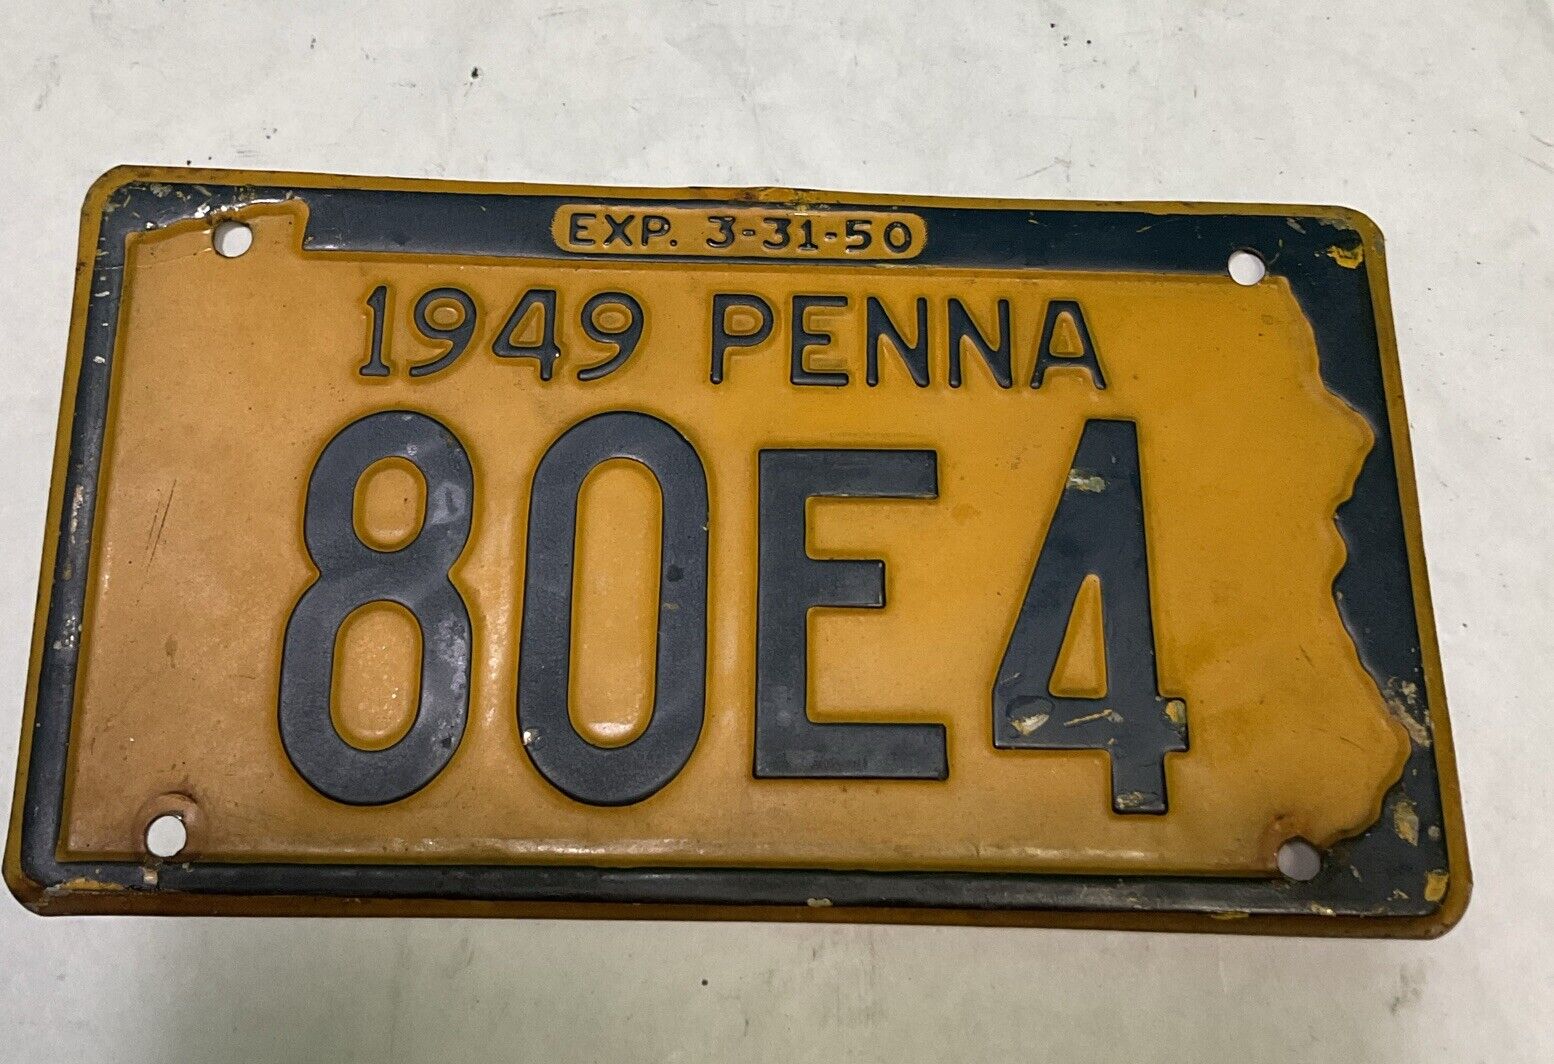 Vintage 1949 PENNA License Plate 80E4 EXP. 3-31-50 Yellow With Blue